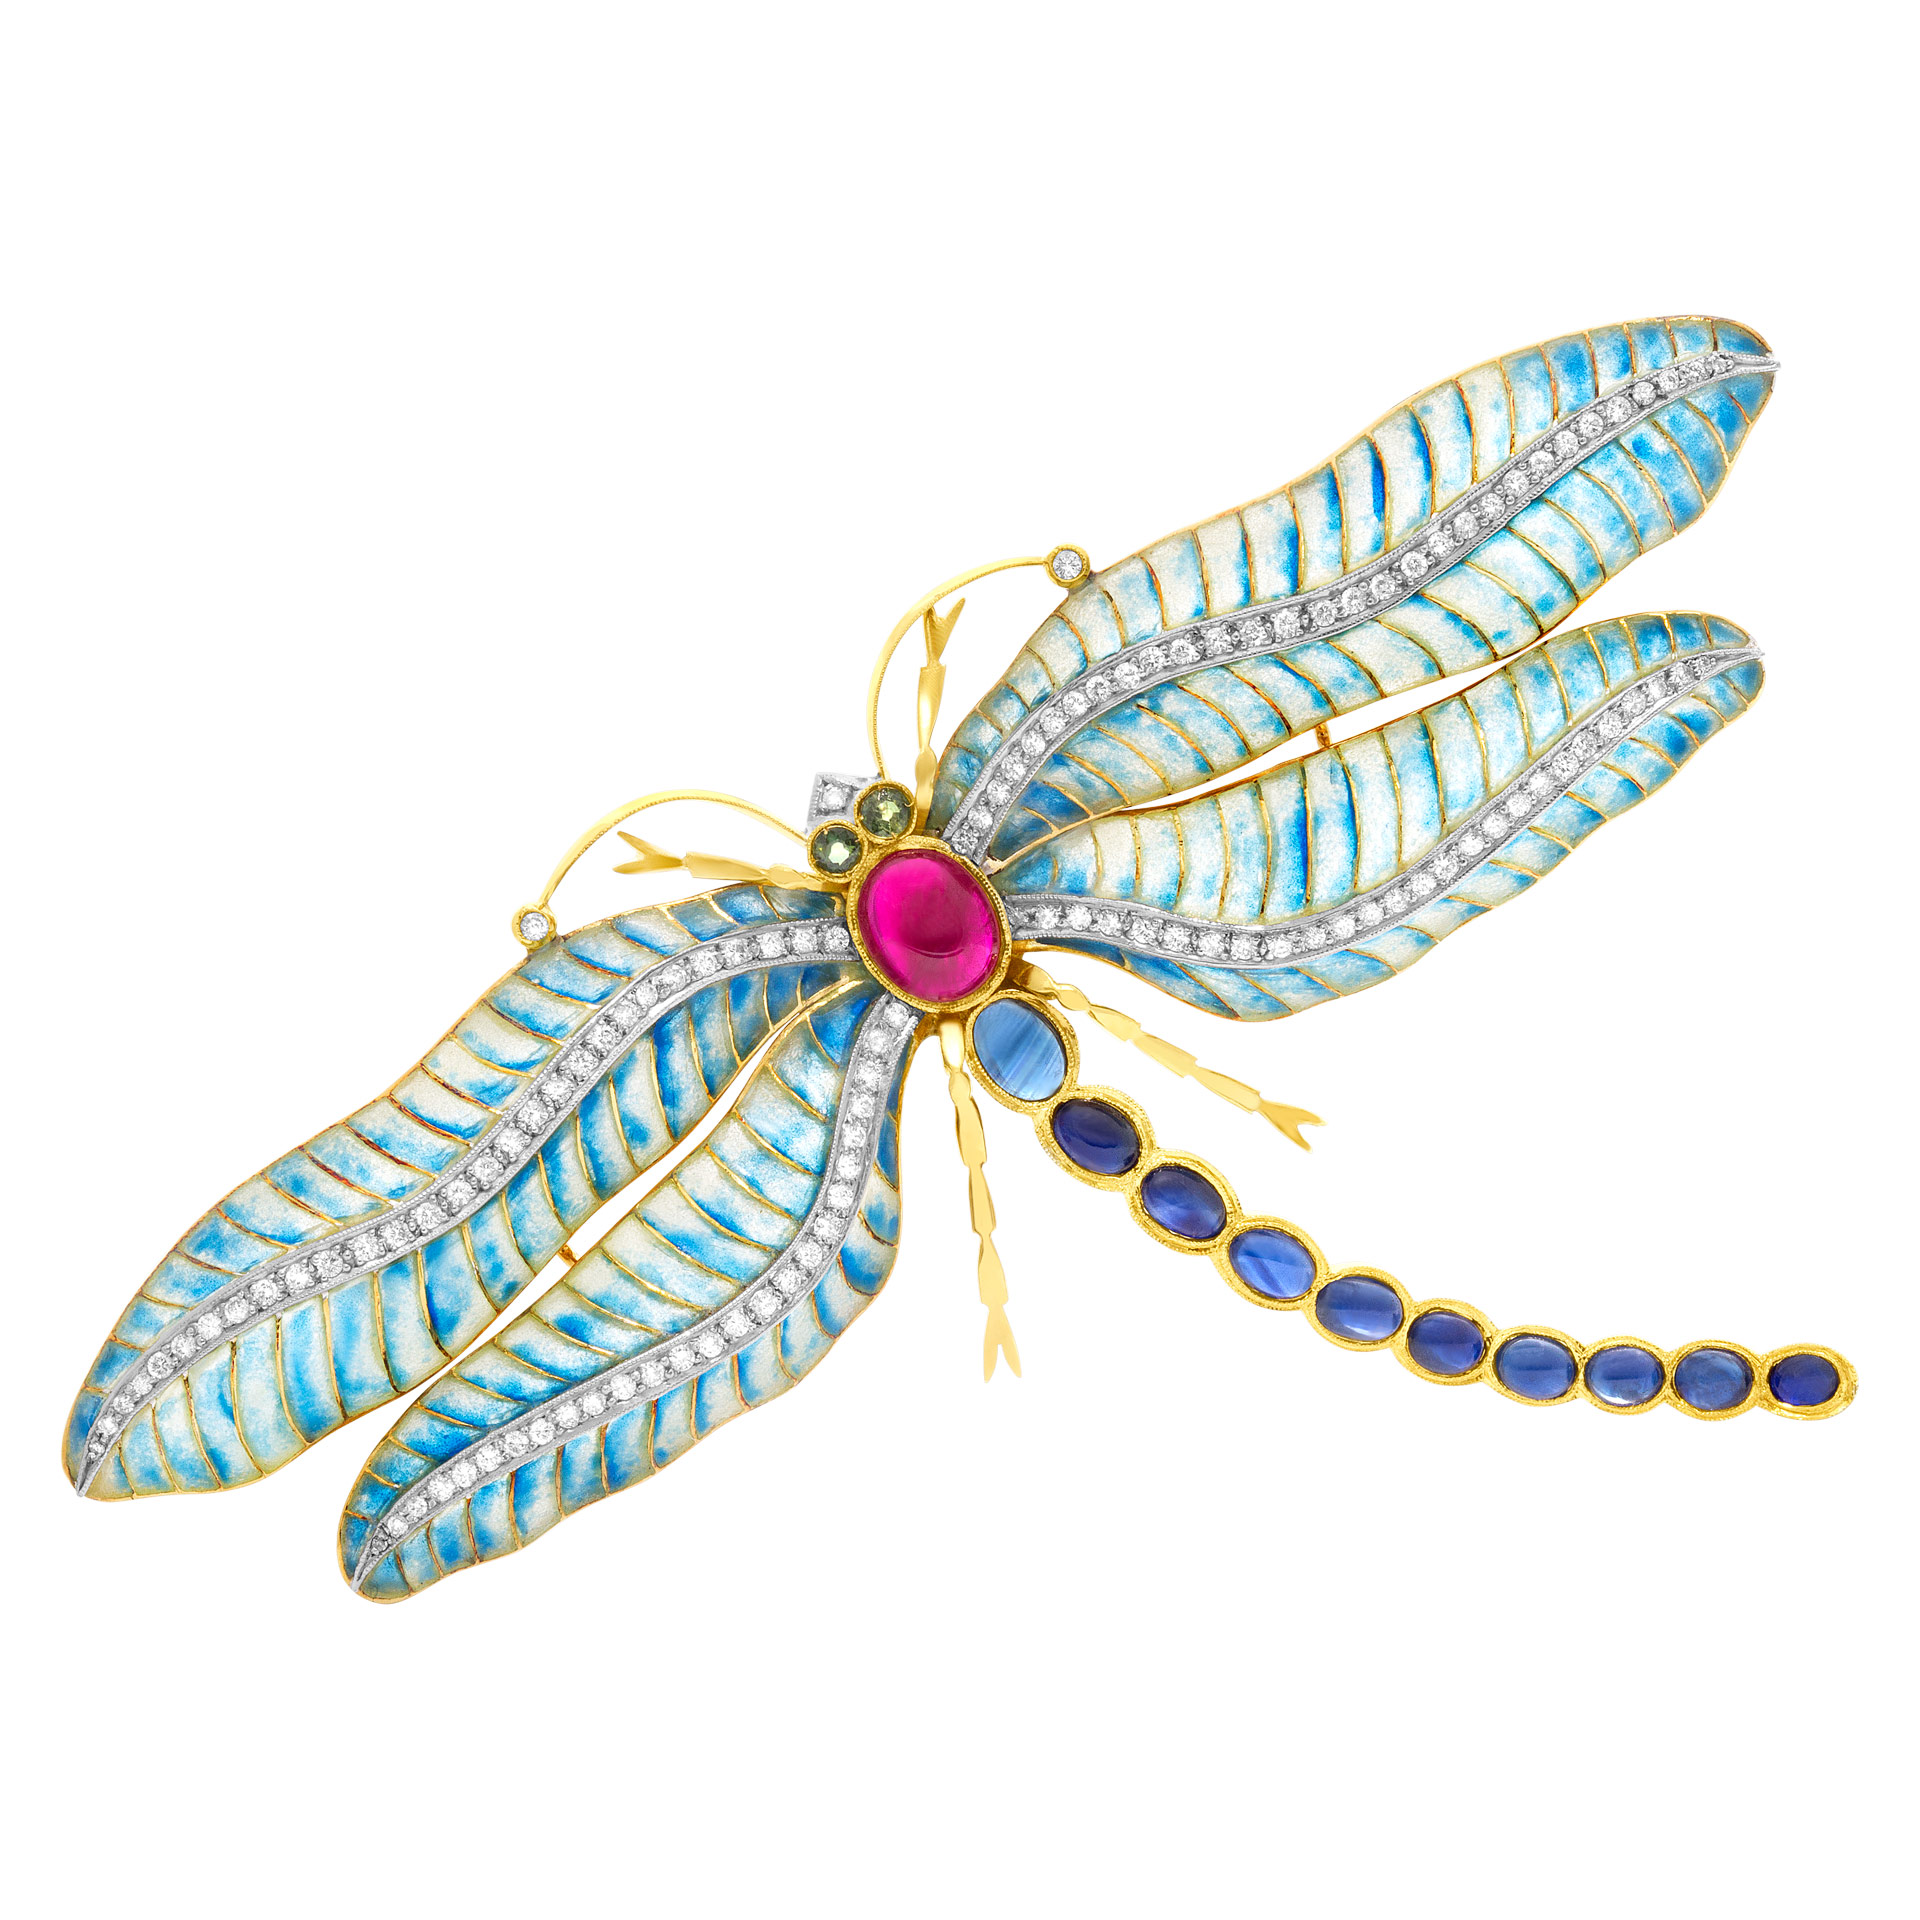 Dragonfly in 18k with 2.25 cts in diamonds, 1.50 ct in cabochon ruby, enamel and sapphires